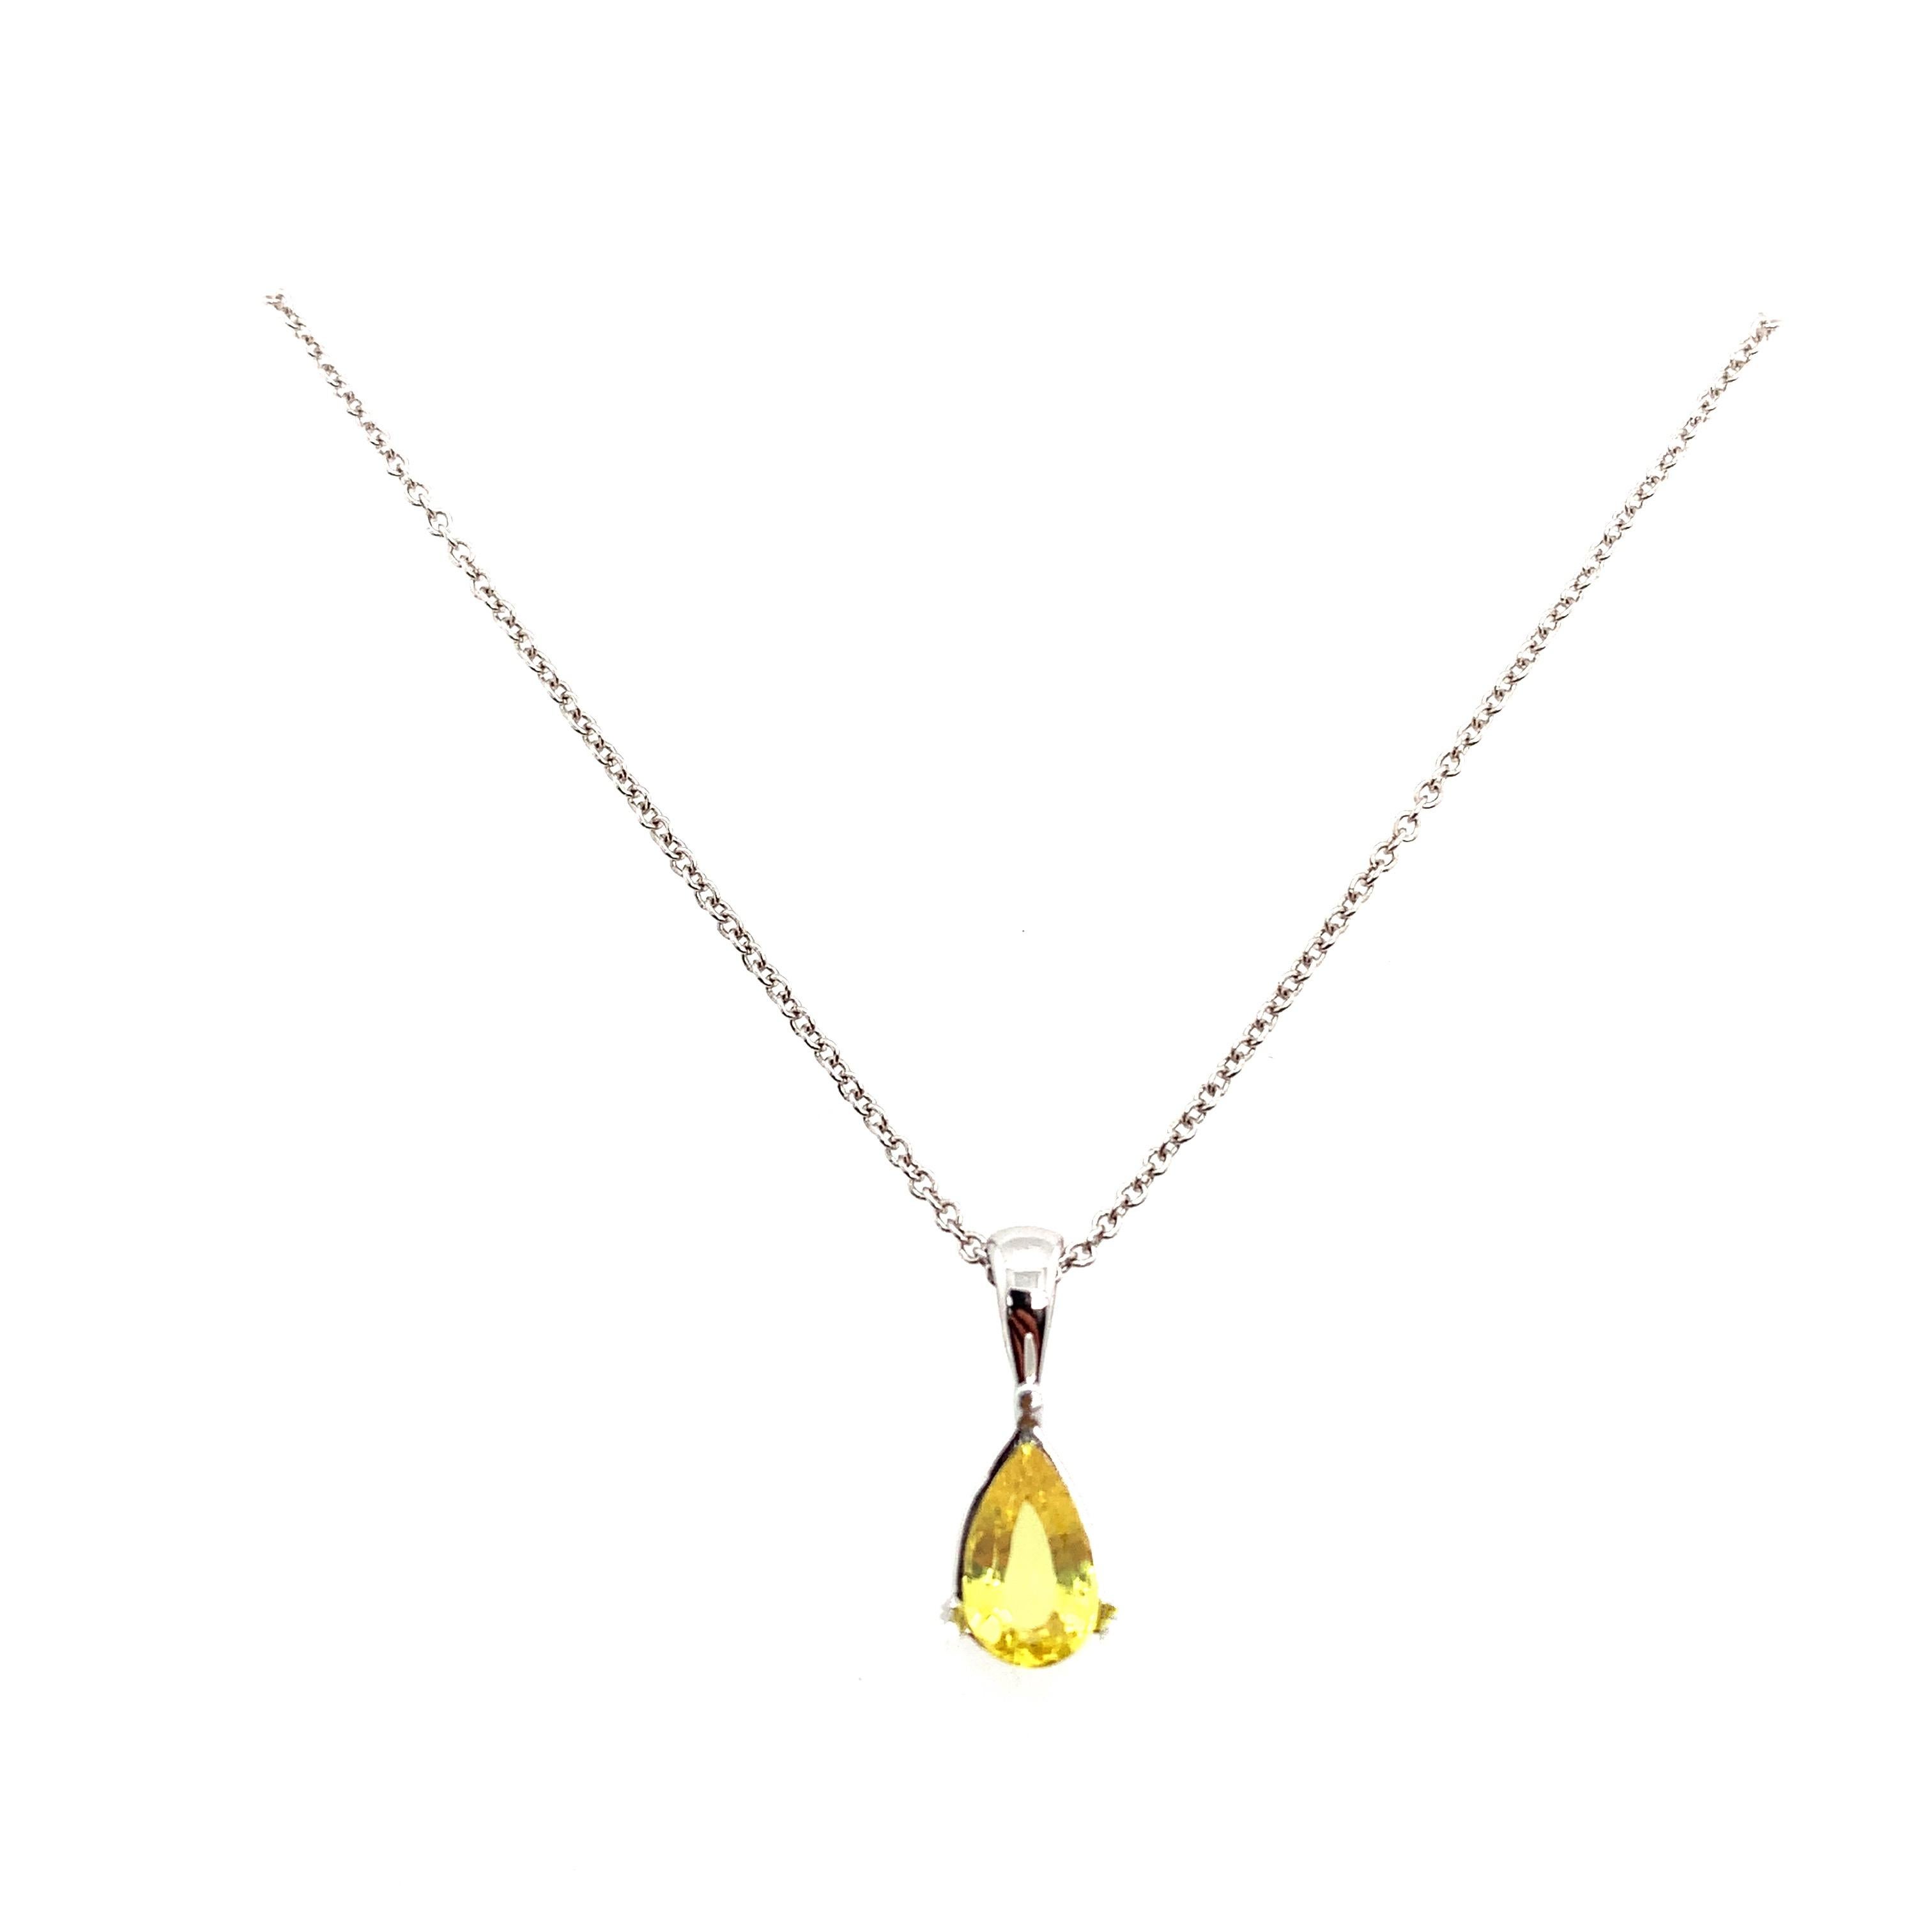 Yellow sapphire solitaire pendant necklace 18k white gold
Yellow sapphire natural pear shaped total weight 0.75ct  natural untreated sapphire mounted in 18k white gold on 18 inches chain length. 
Hallmarked.
Solitaire style pendant necklace with